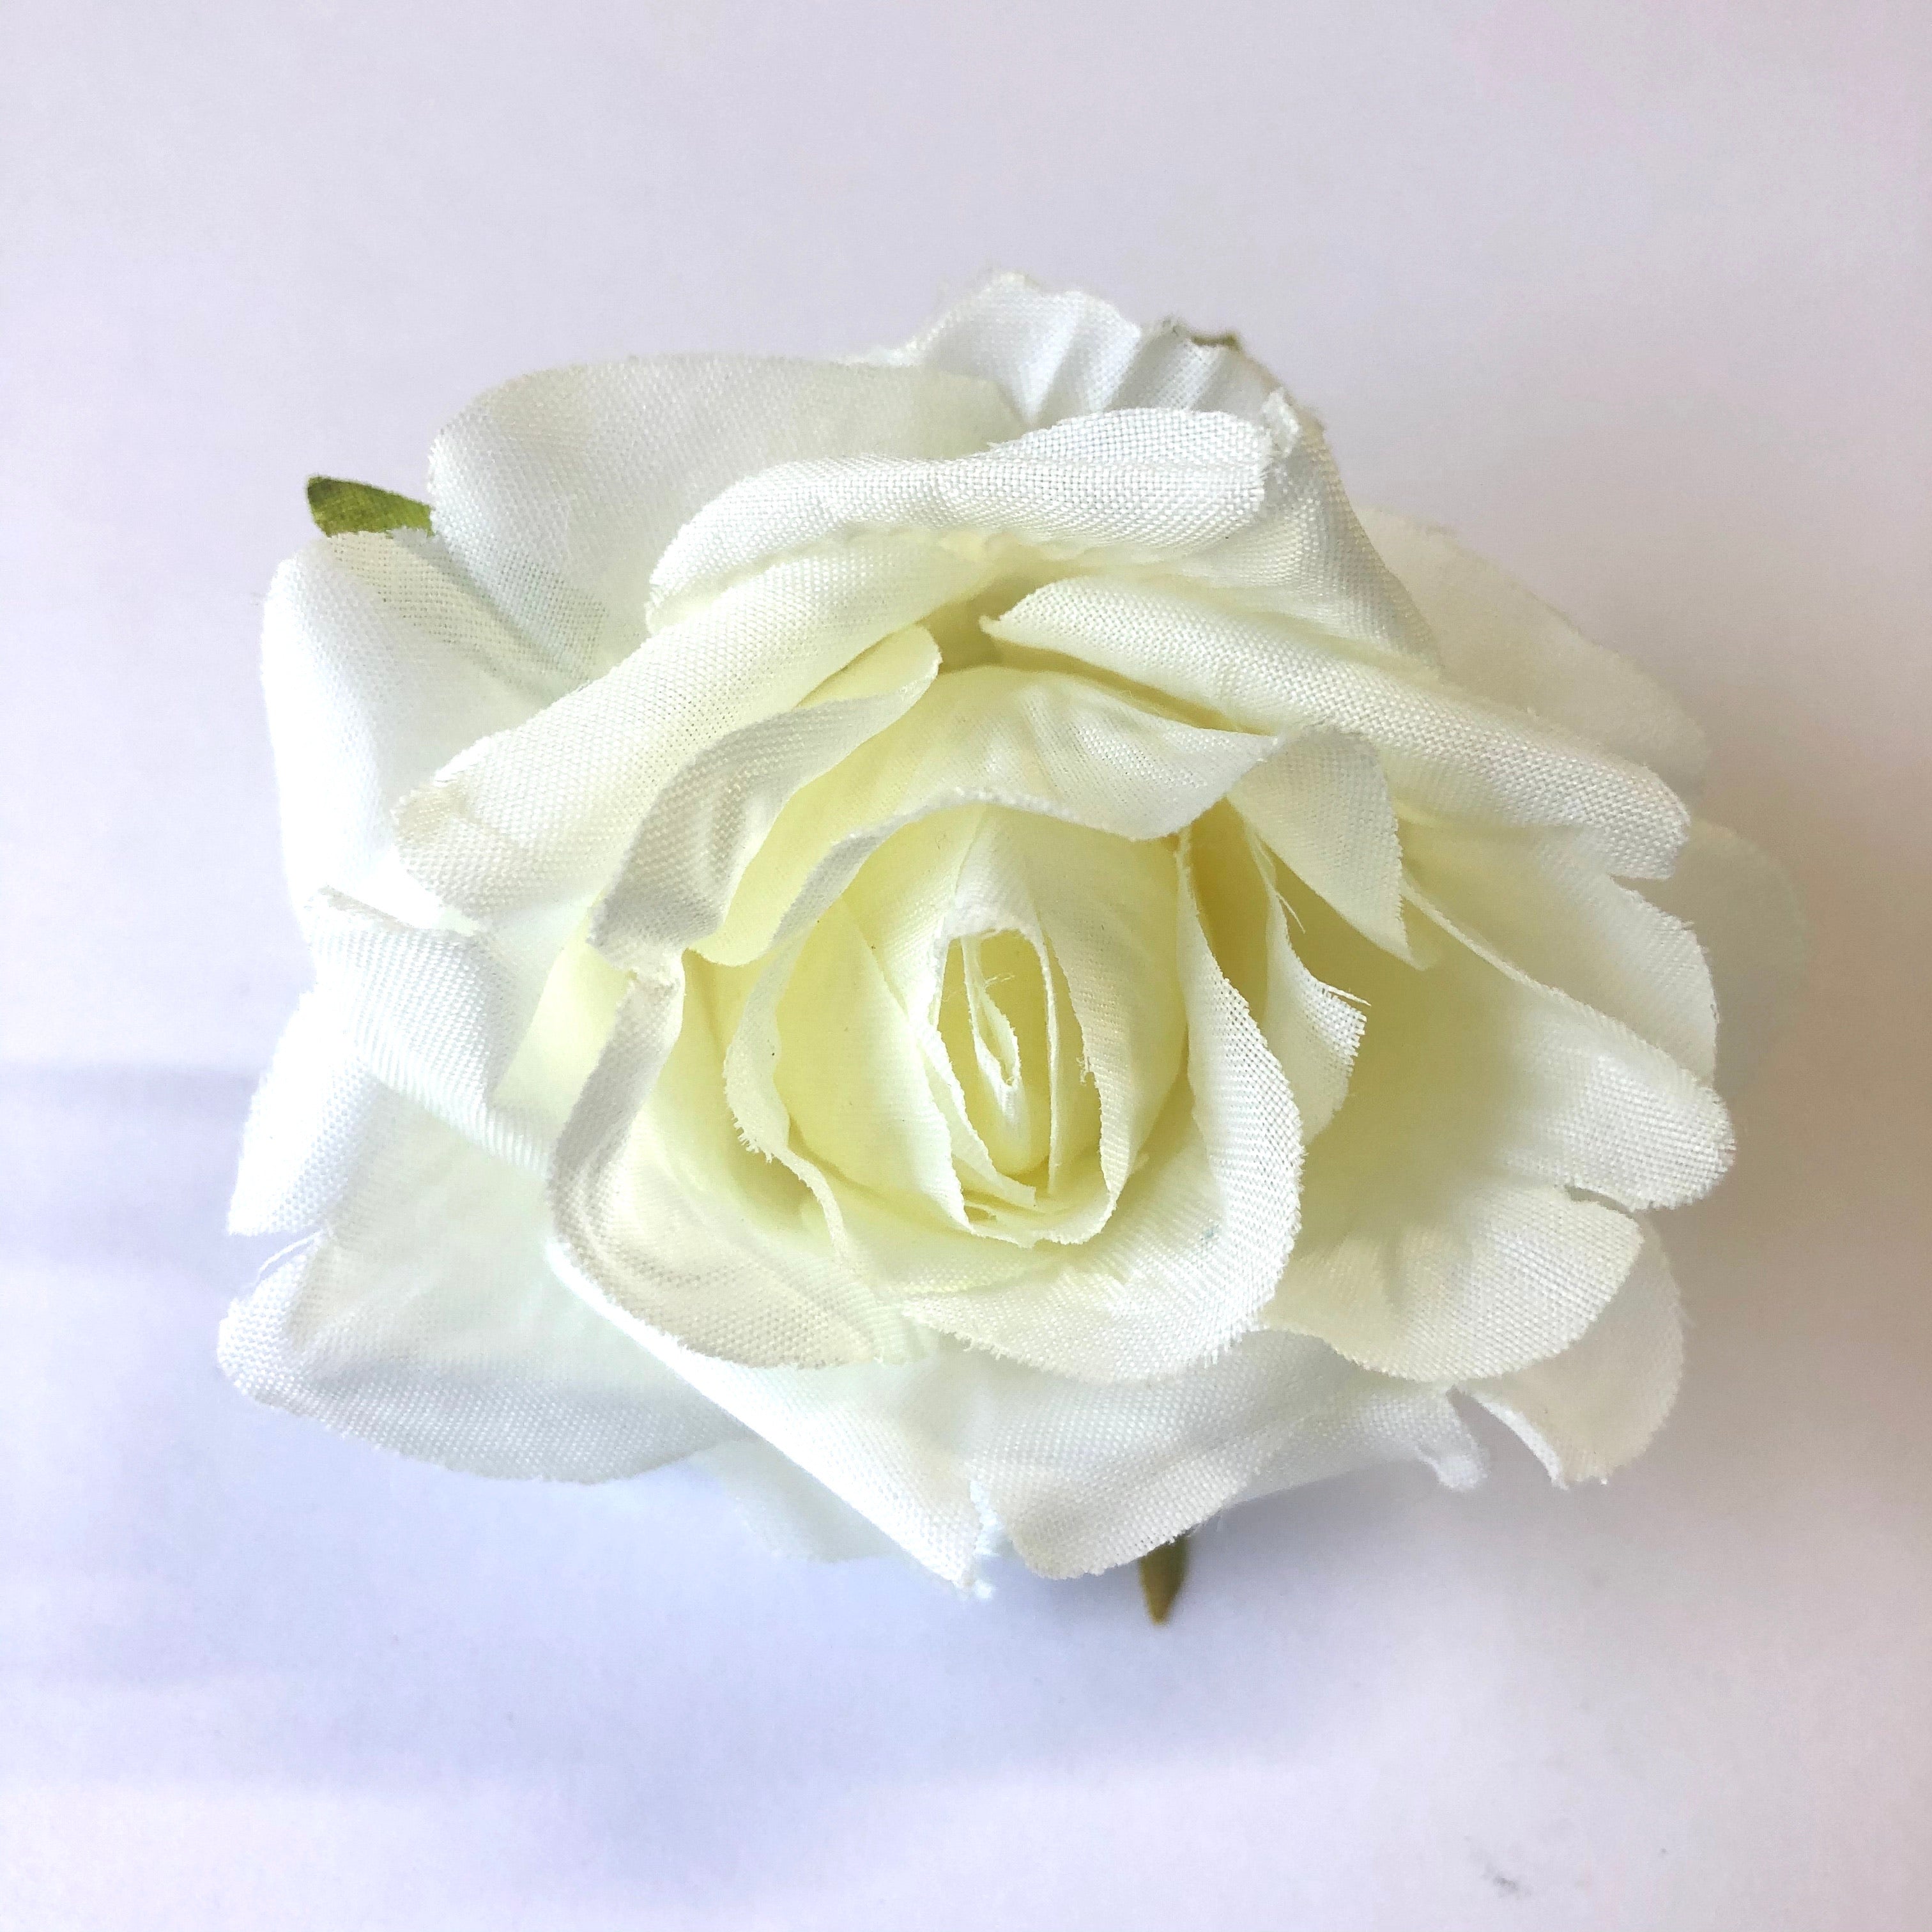 Artificial Silk Flower Head - White Rose Style 50 - 1pc